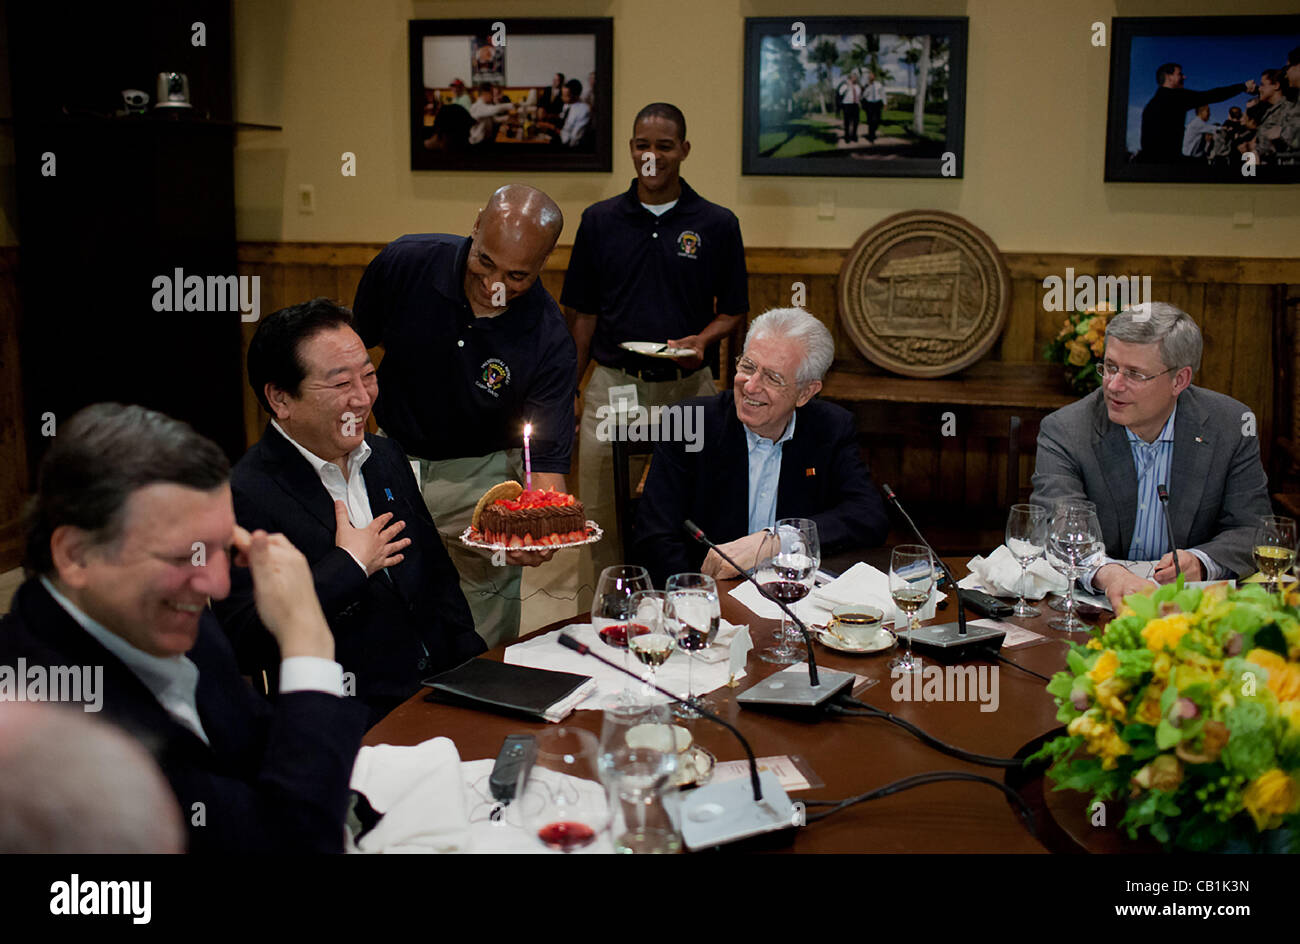 A chocolate cake is presented to Prime Minister Yoshihiko Noda of Japan to celebrate his May 20 birthday during a G8 Summit working dinner in Laurel Cabin May 18, 2012 at Camp David, Maryland. Seated, from left, are José Manuel Barroso, President of the European Commission, Prime Minister Mario Mont Stock Photo